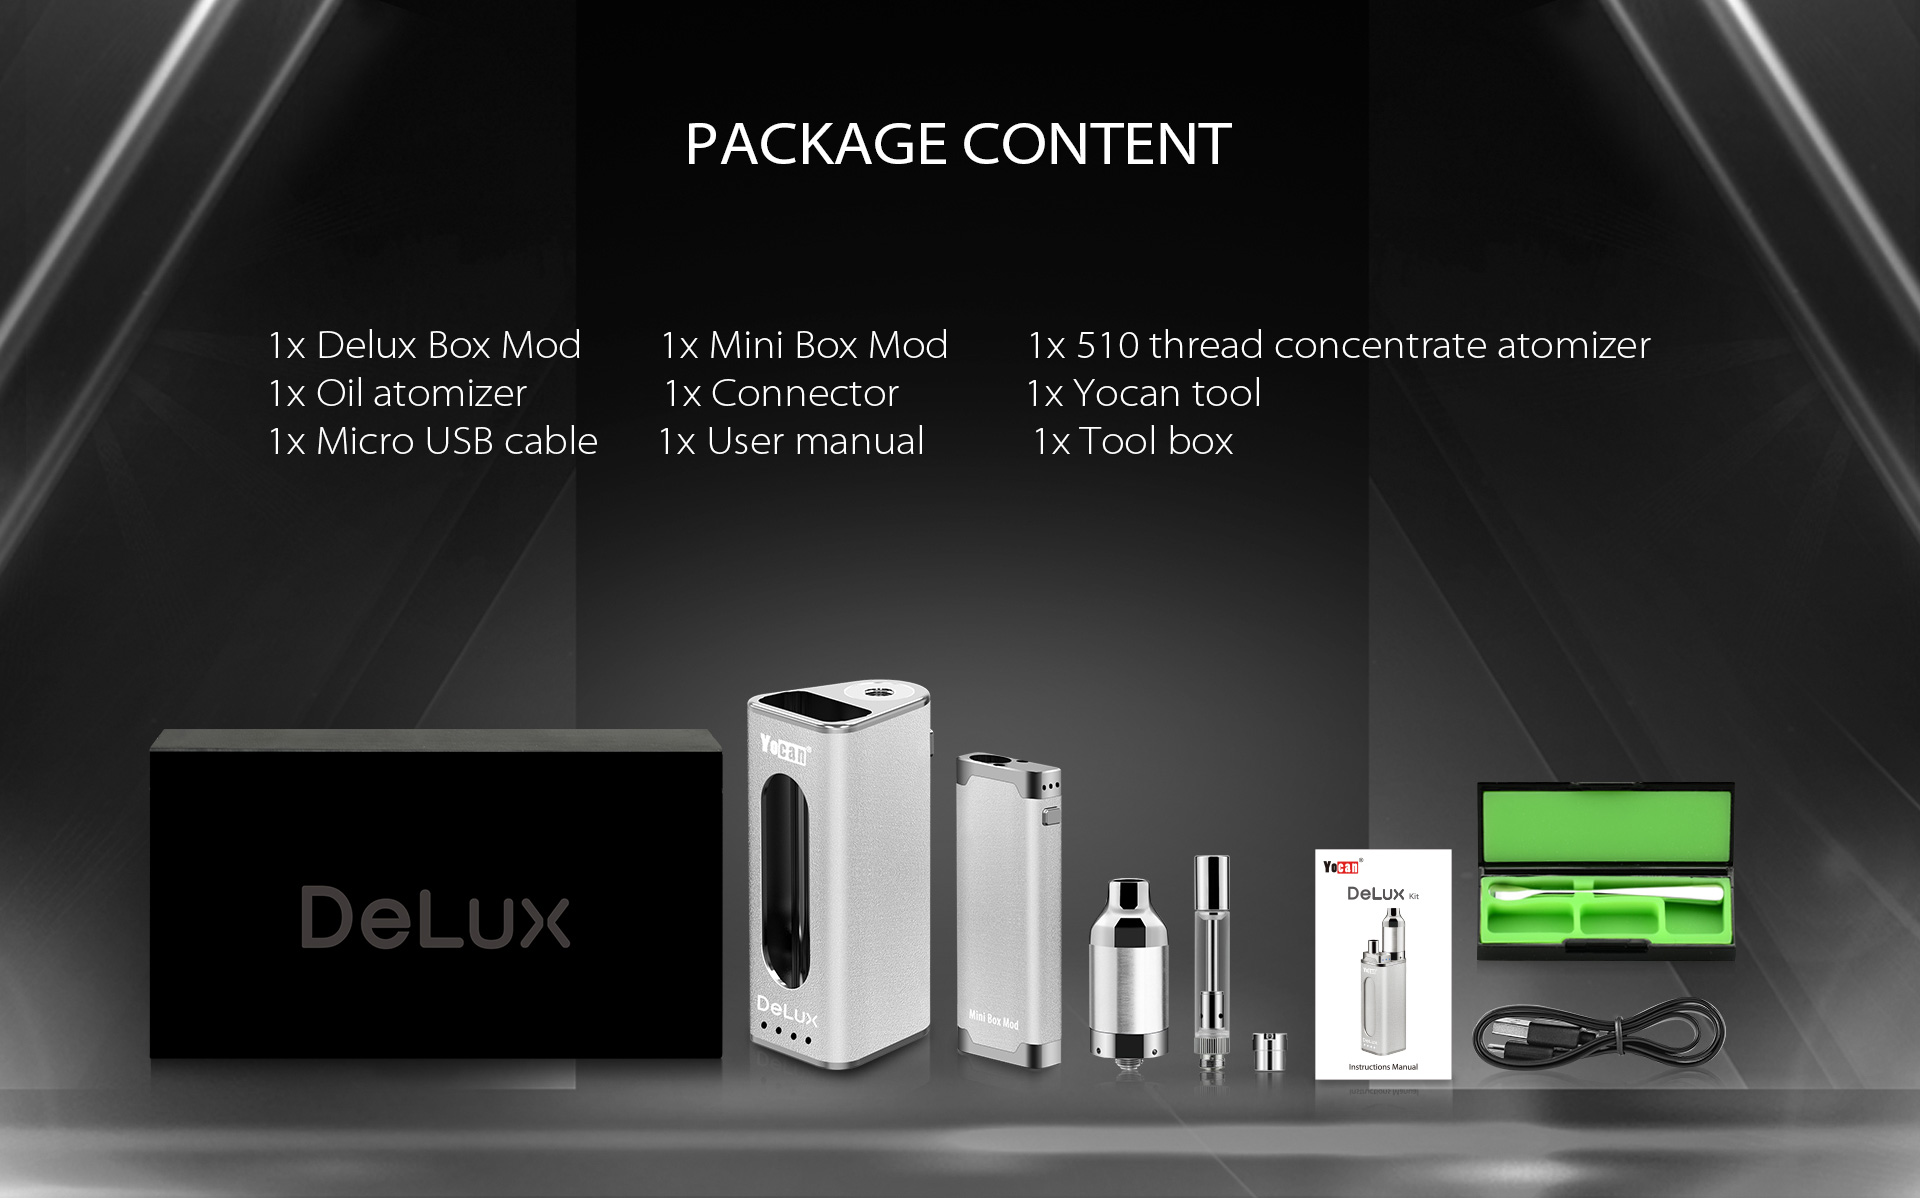 Yocan DeLux package content.